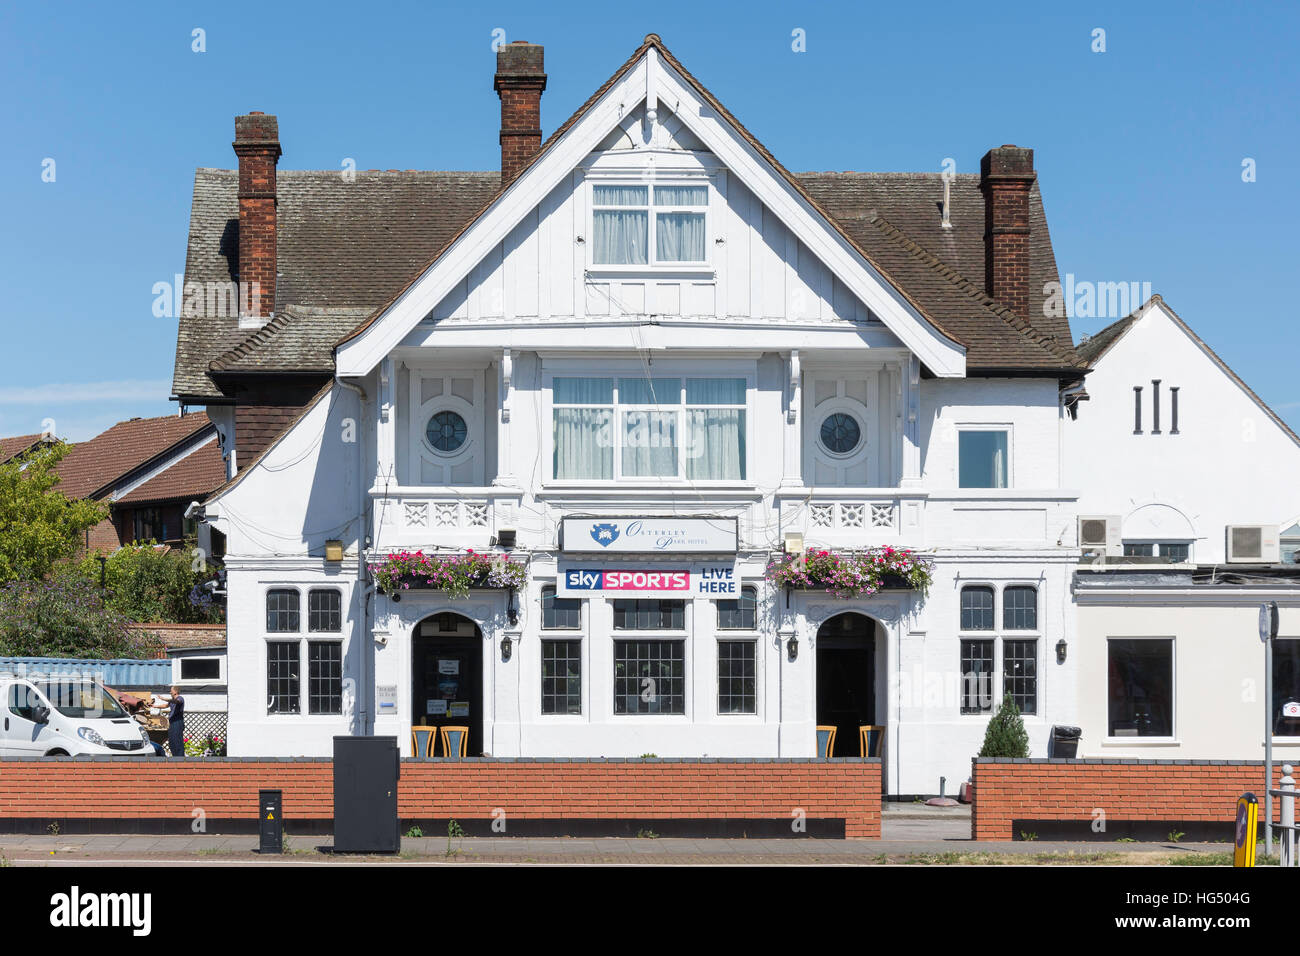 Osterley Park Hotel, Great West Road, Osterley, London Borough di Hounslow, Greater London, England, Regno Unito Foto Stock